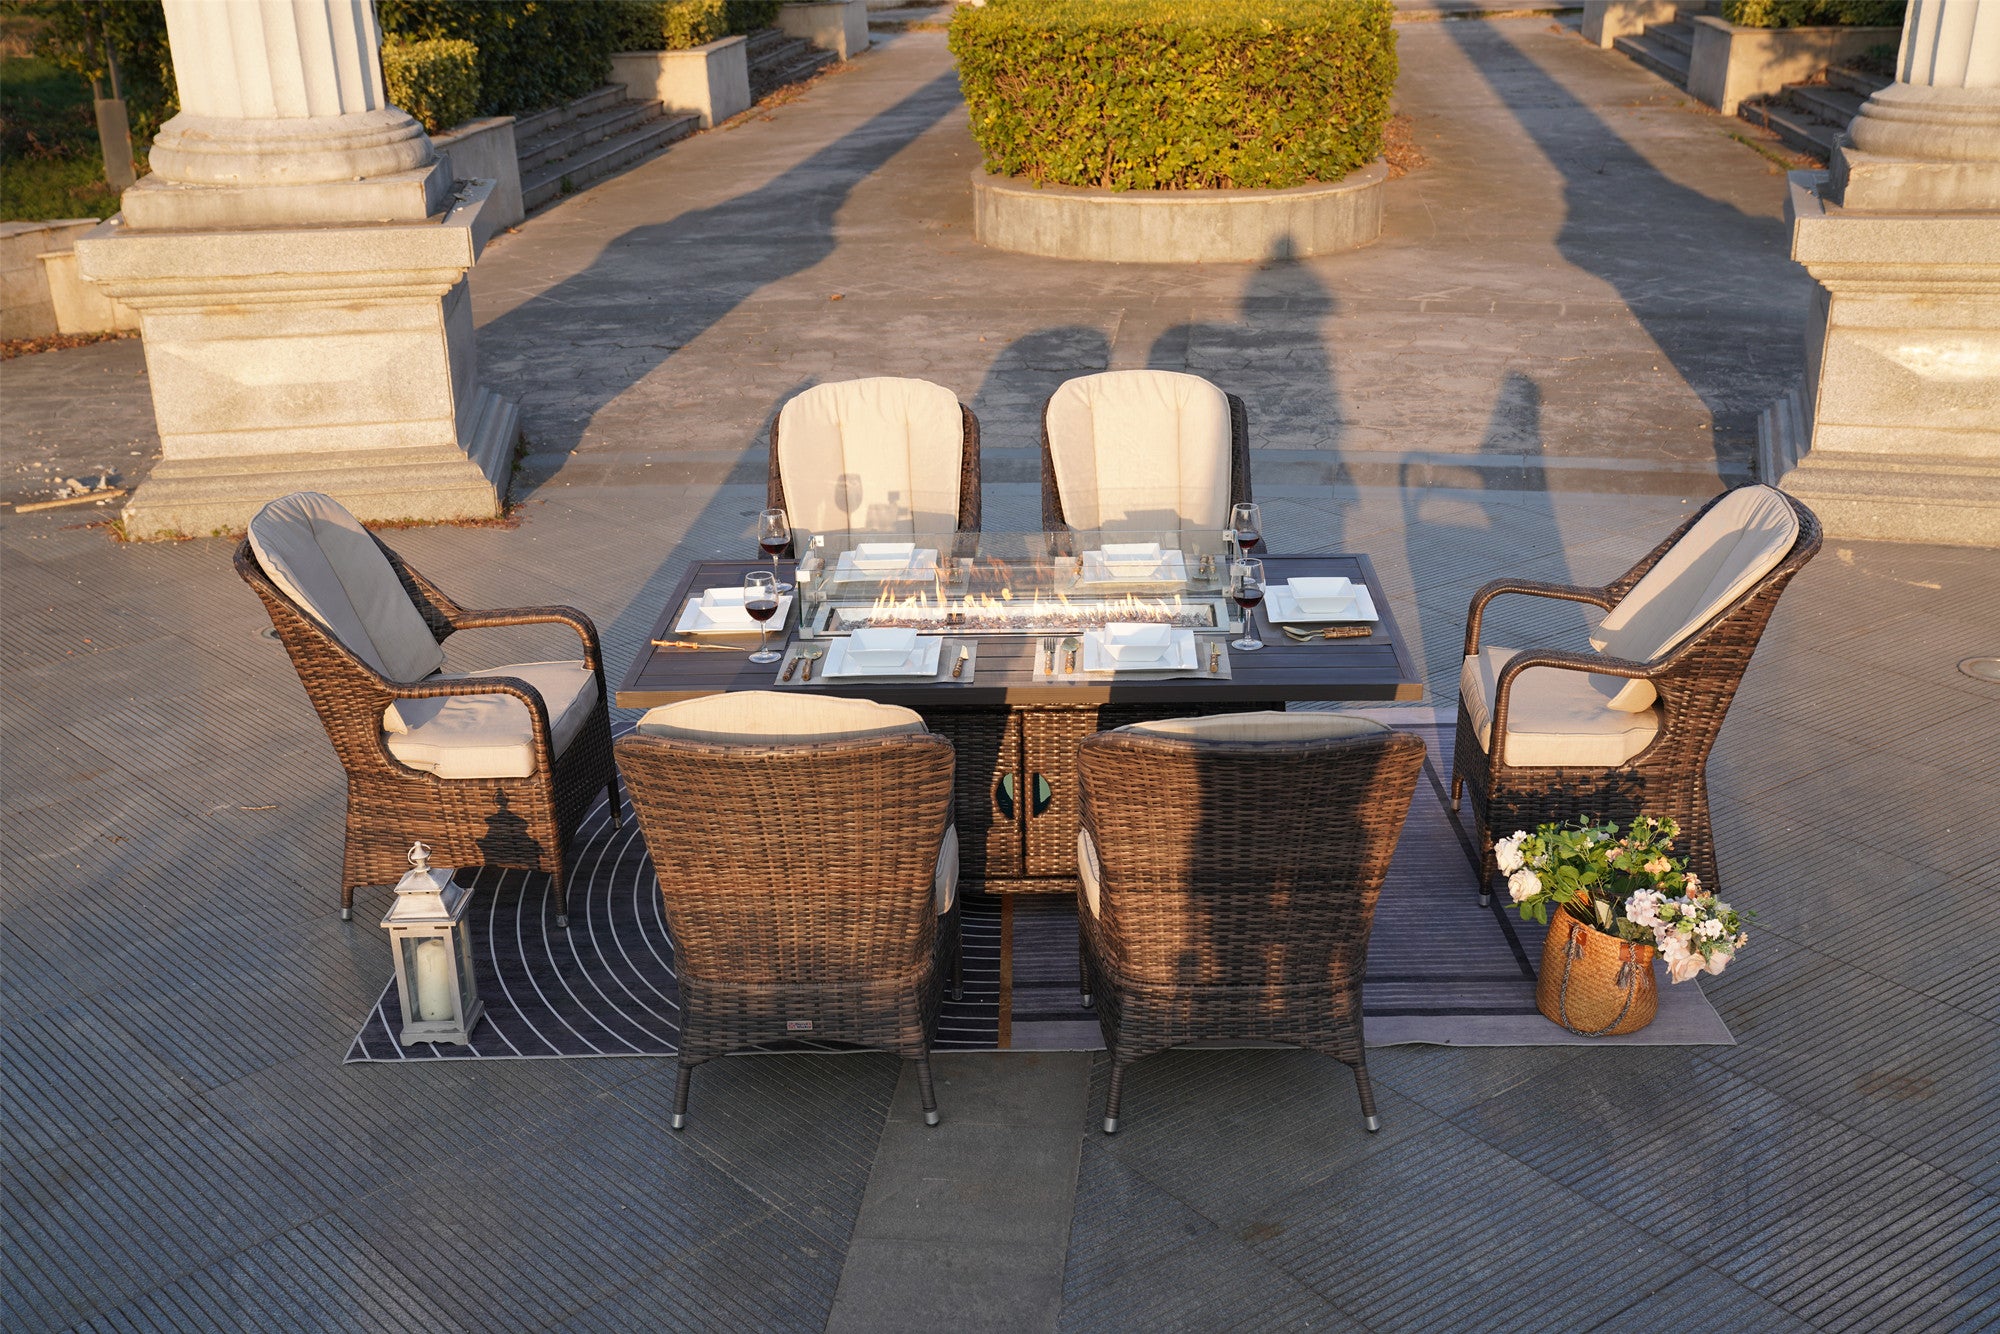 NEW Elegant PE Wicker and Aluminium Patio Dining Sets with Fire Pit Table